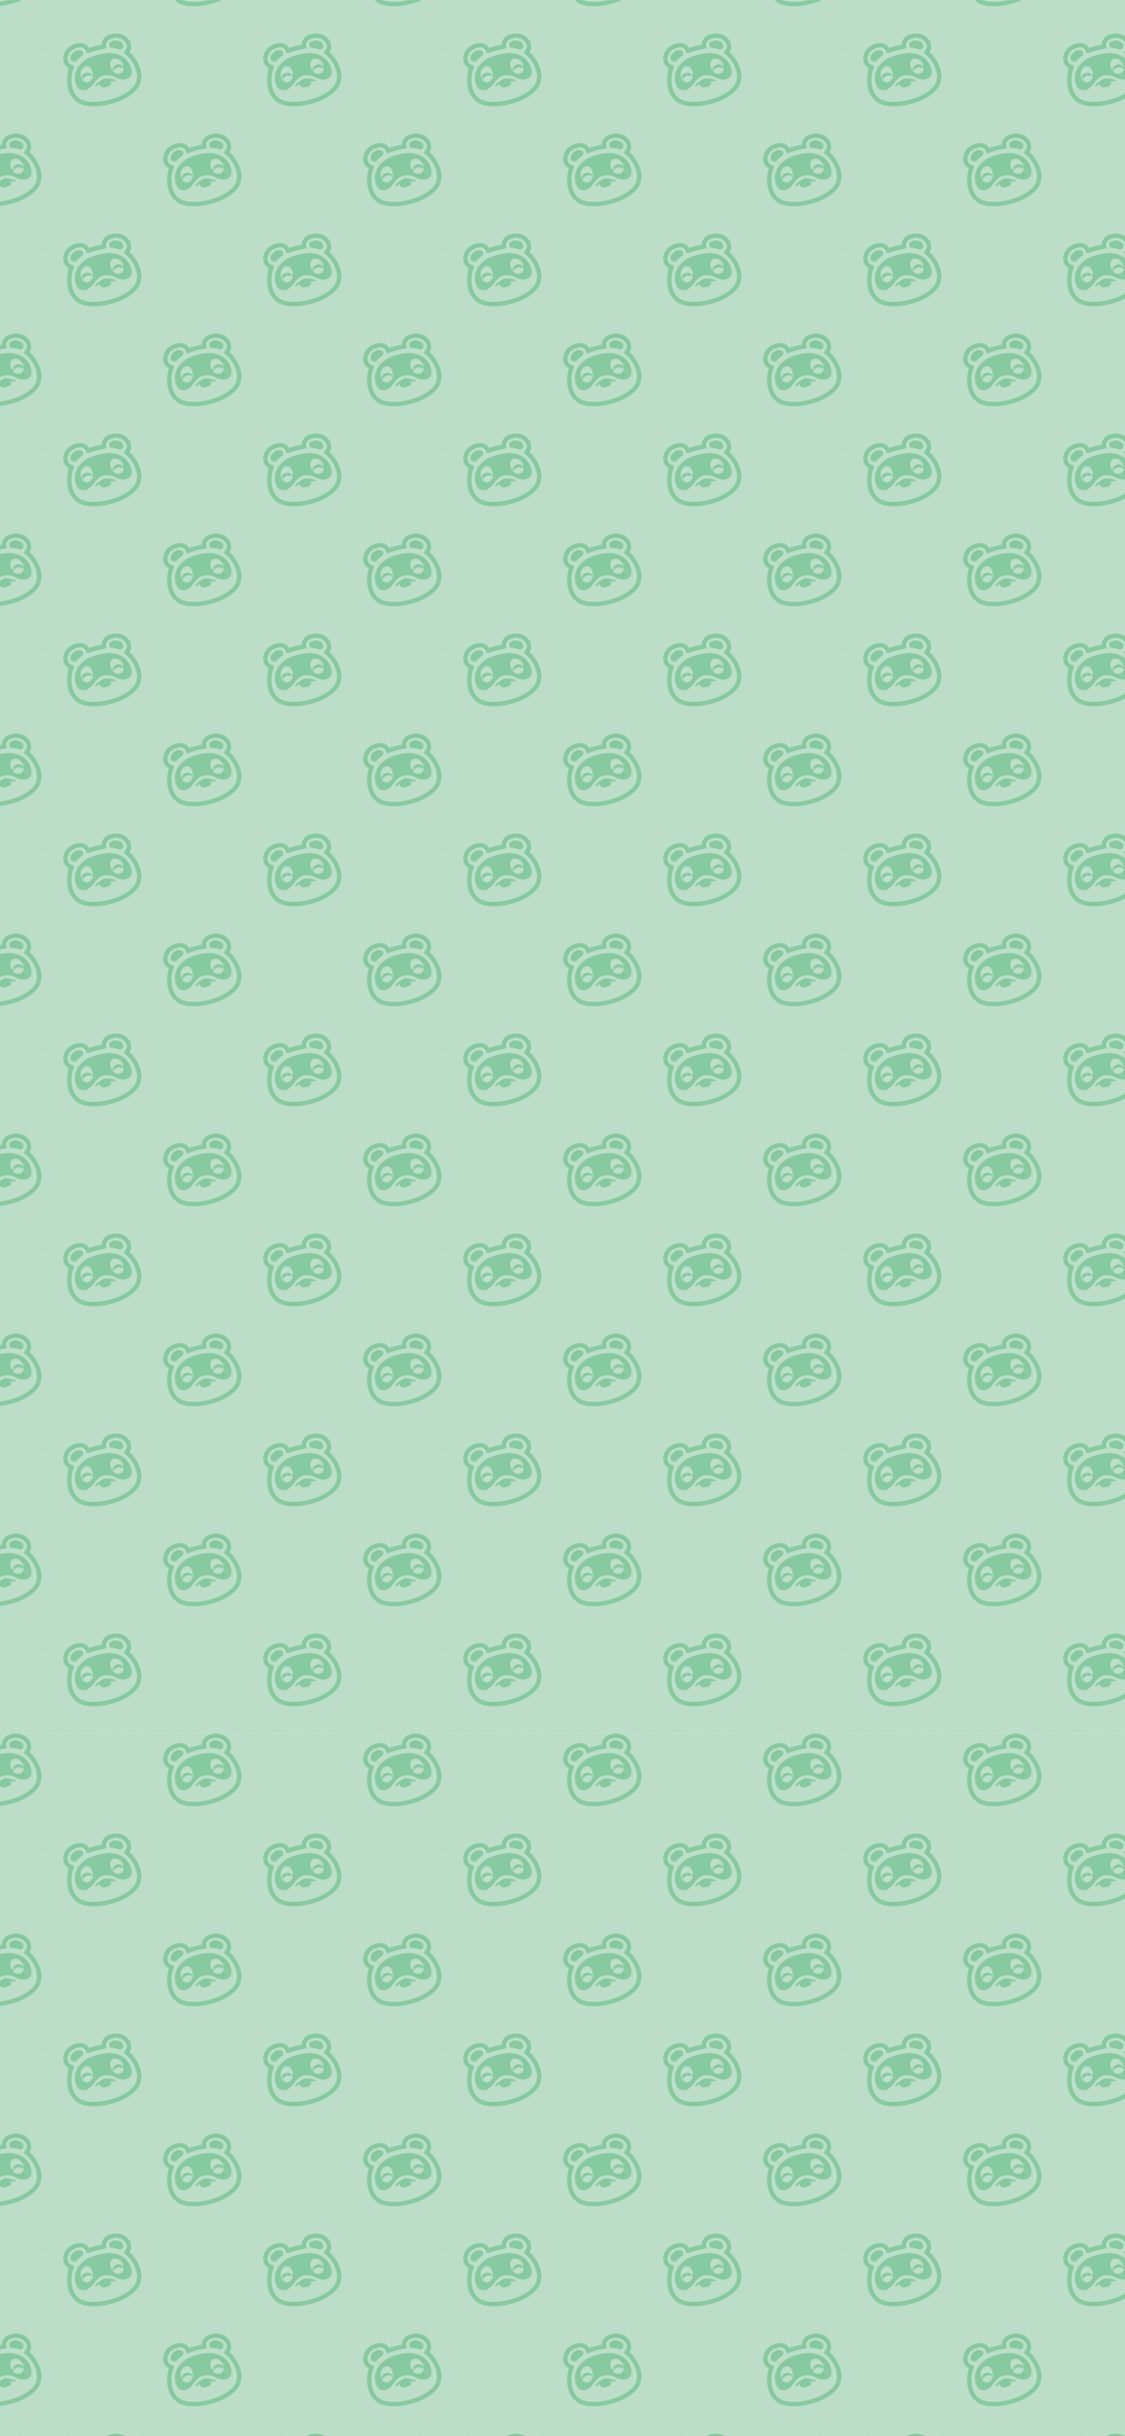 A green pattern of bicycles on a light green background. - Animal Crossing